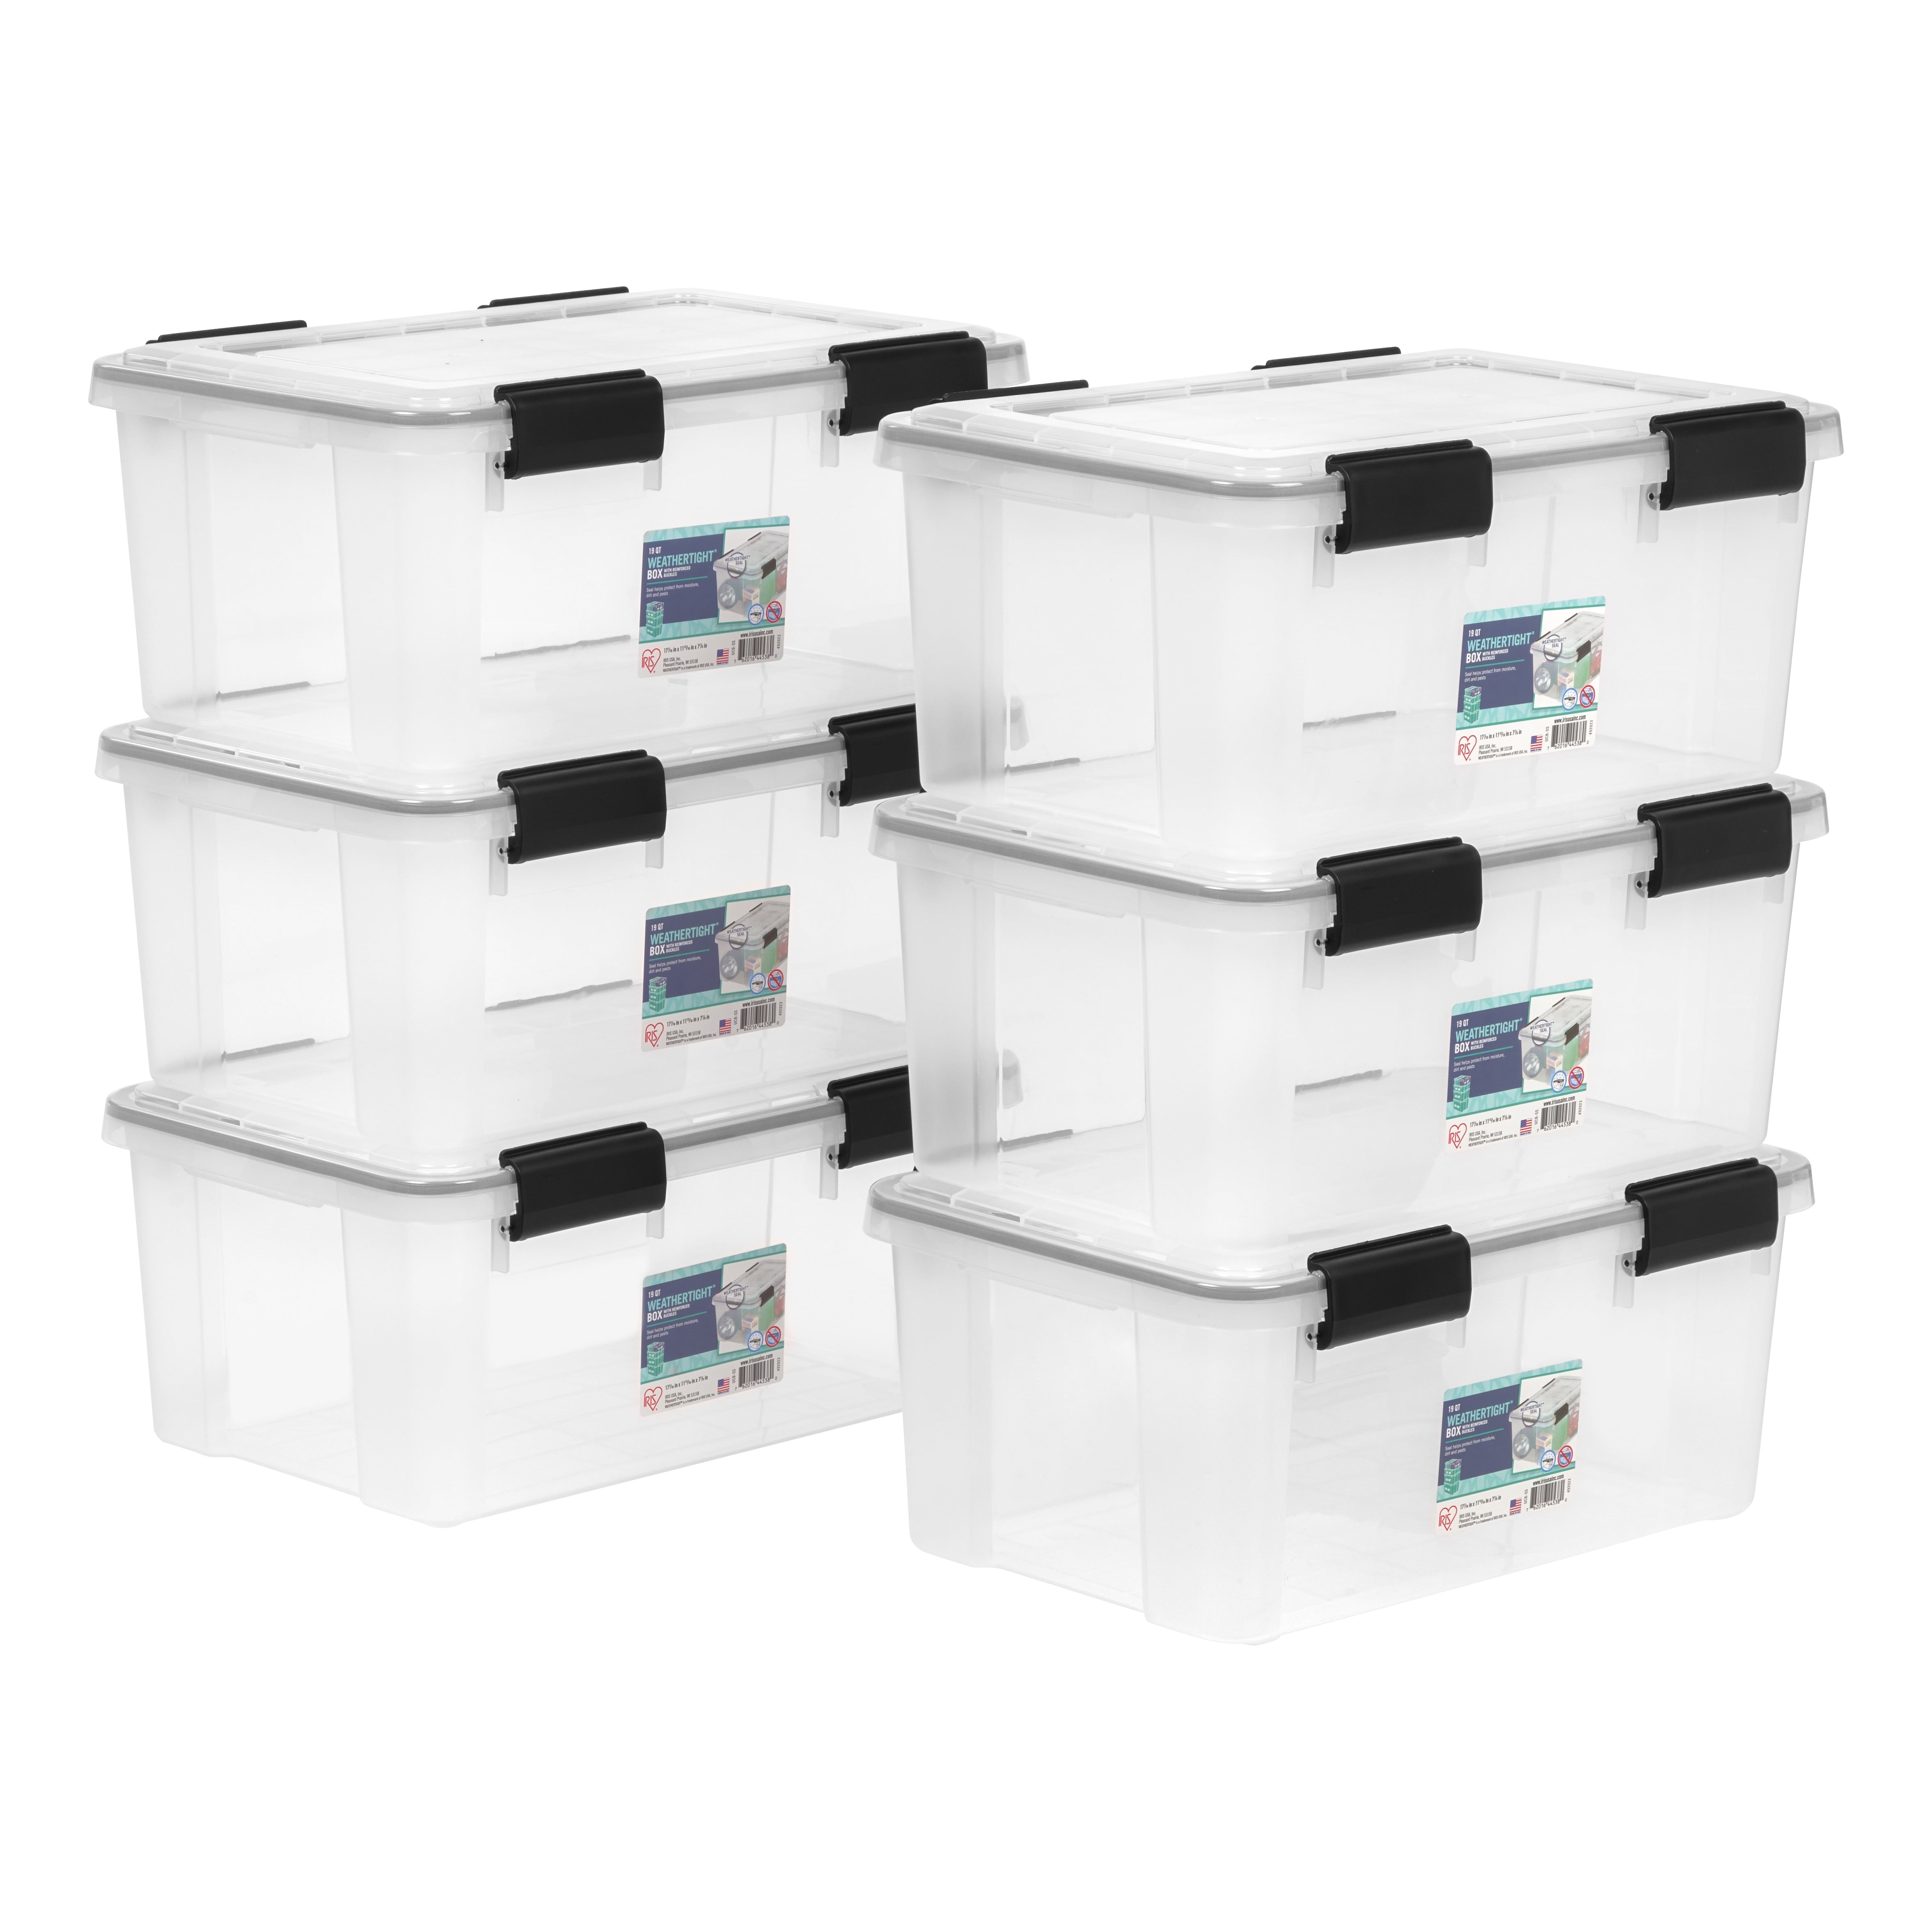 IRIS USA 19Qt Element Resistant® Storage Box with Latches, 6 Pack